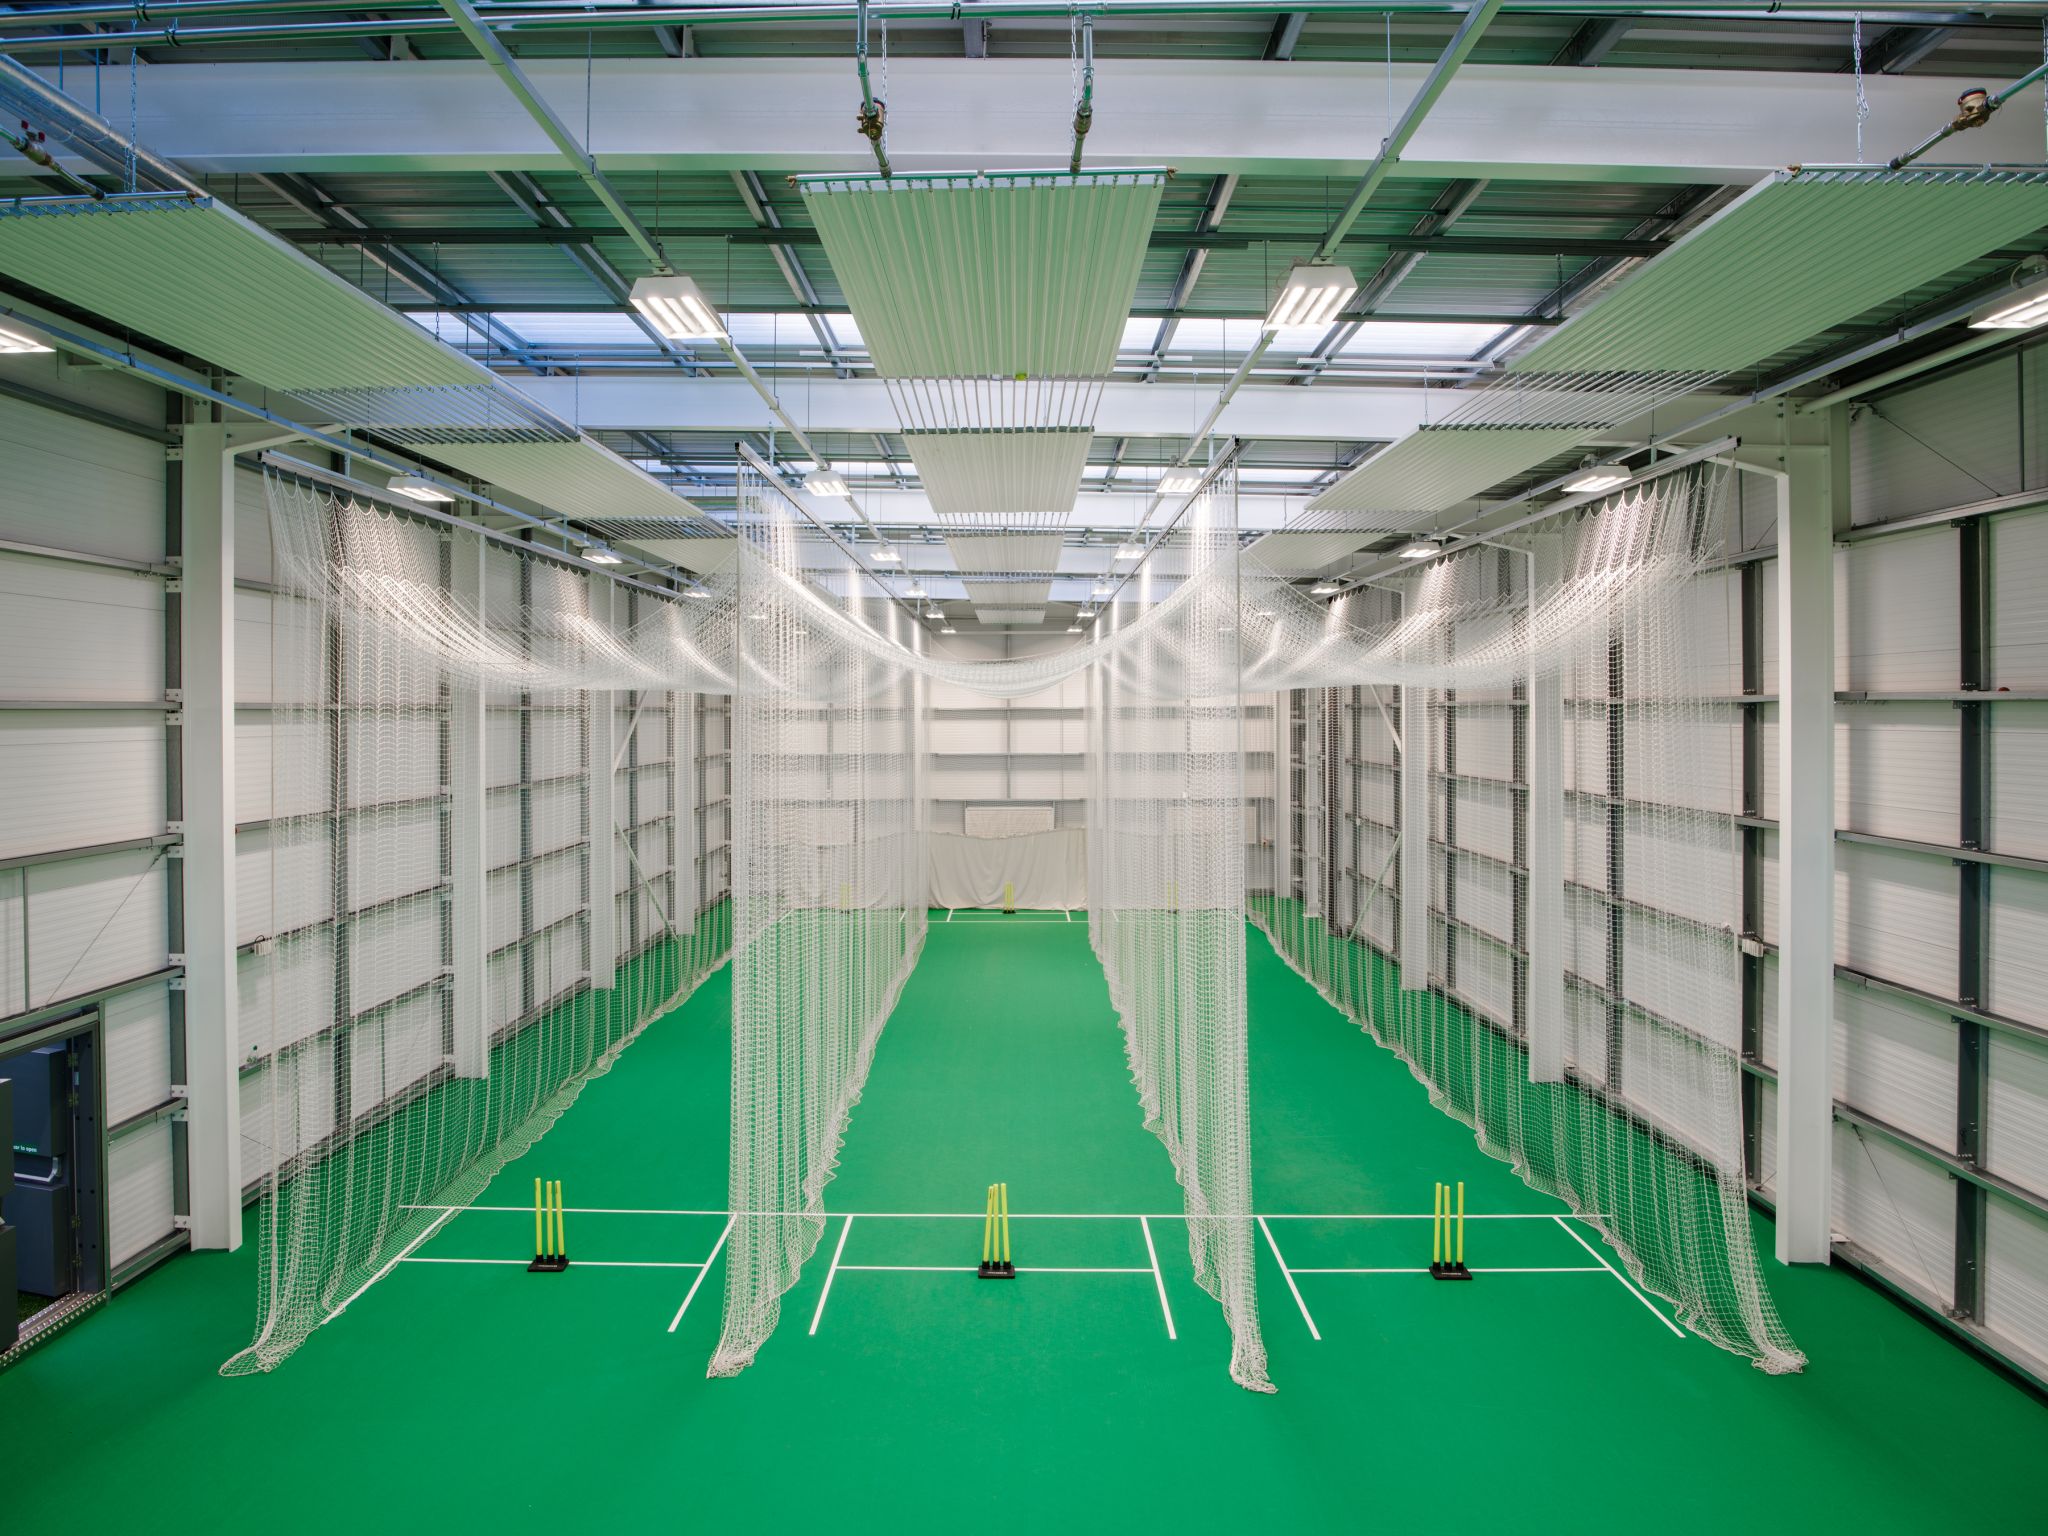 SSUK Uni-Turf Indoor Cricket Sports Floor Trailfinders Sports Club This £3.8m facility at Trailfinders Sports Club in West Ealing, London includes an impressive 3,184-square metres of sporting space.